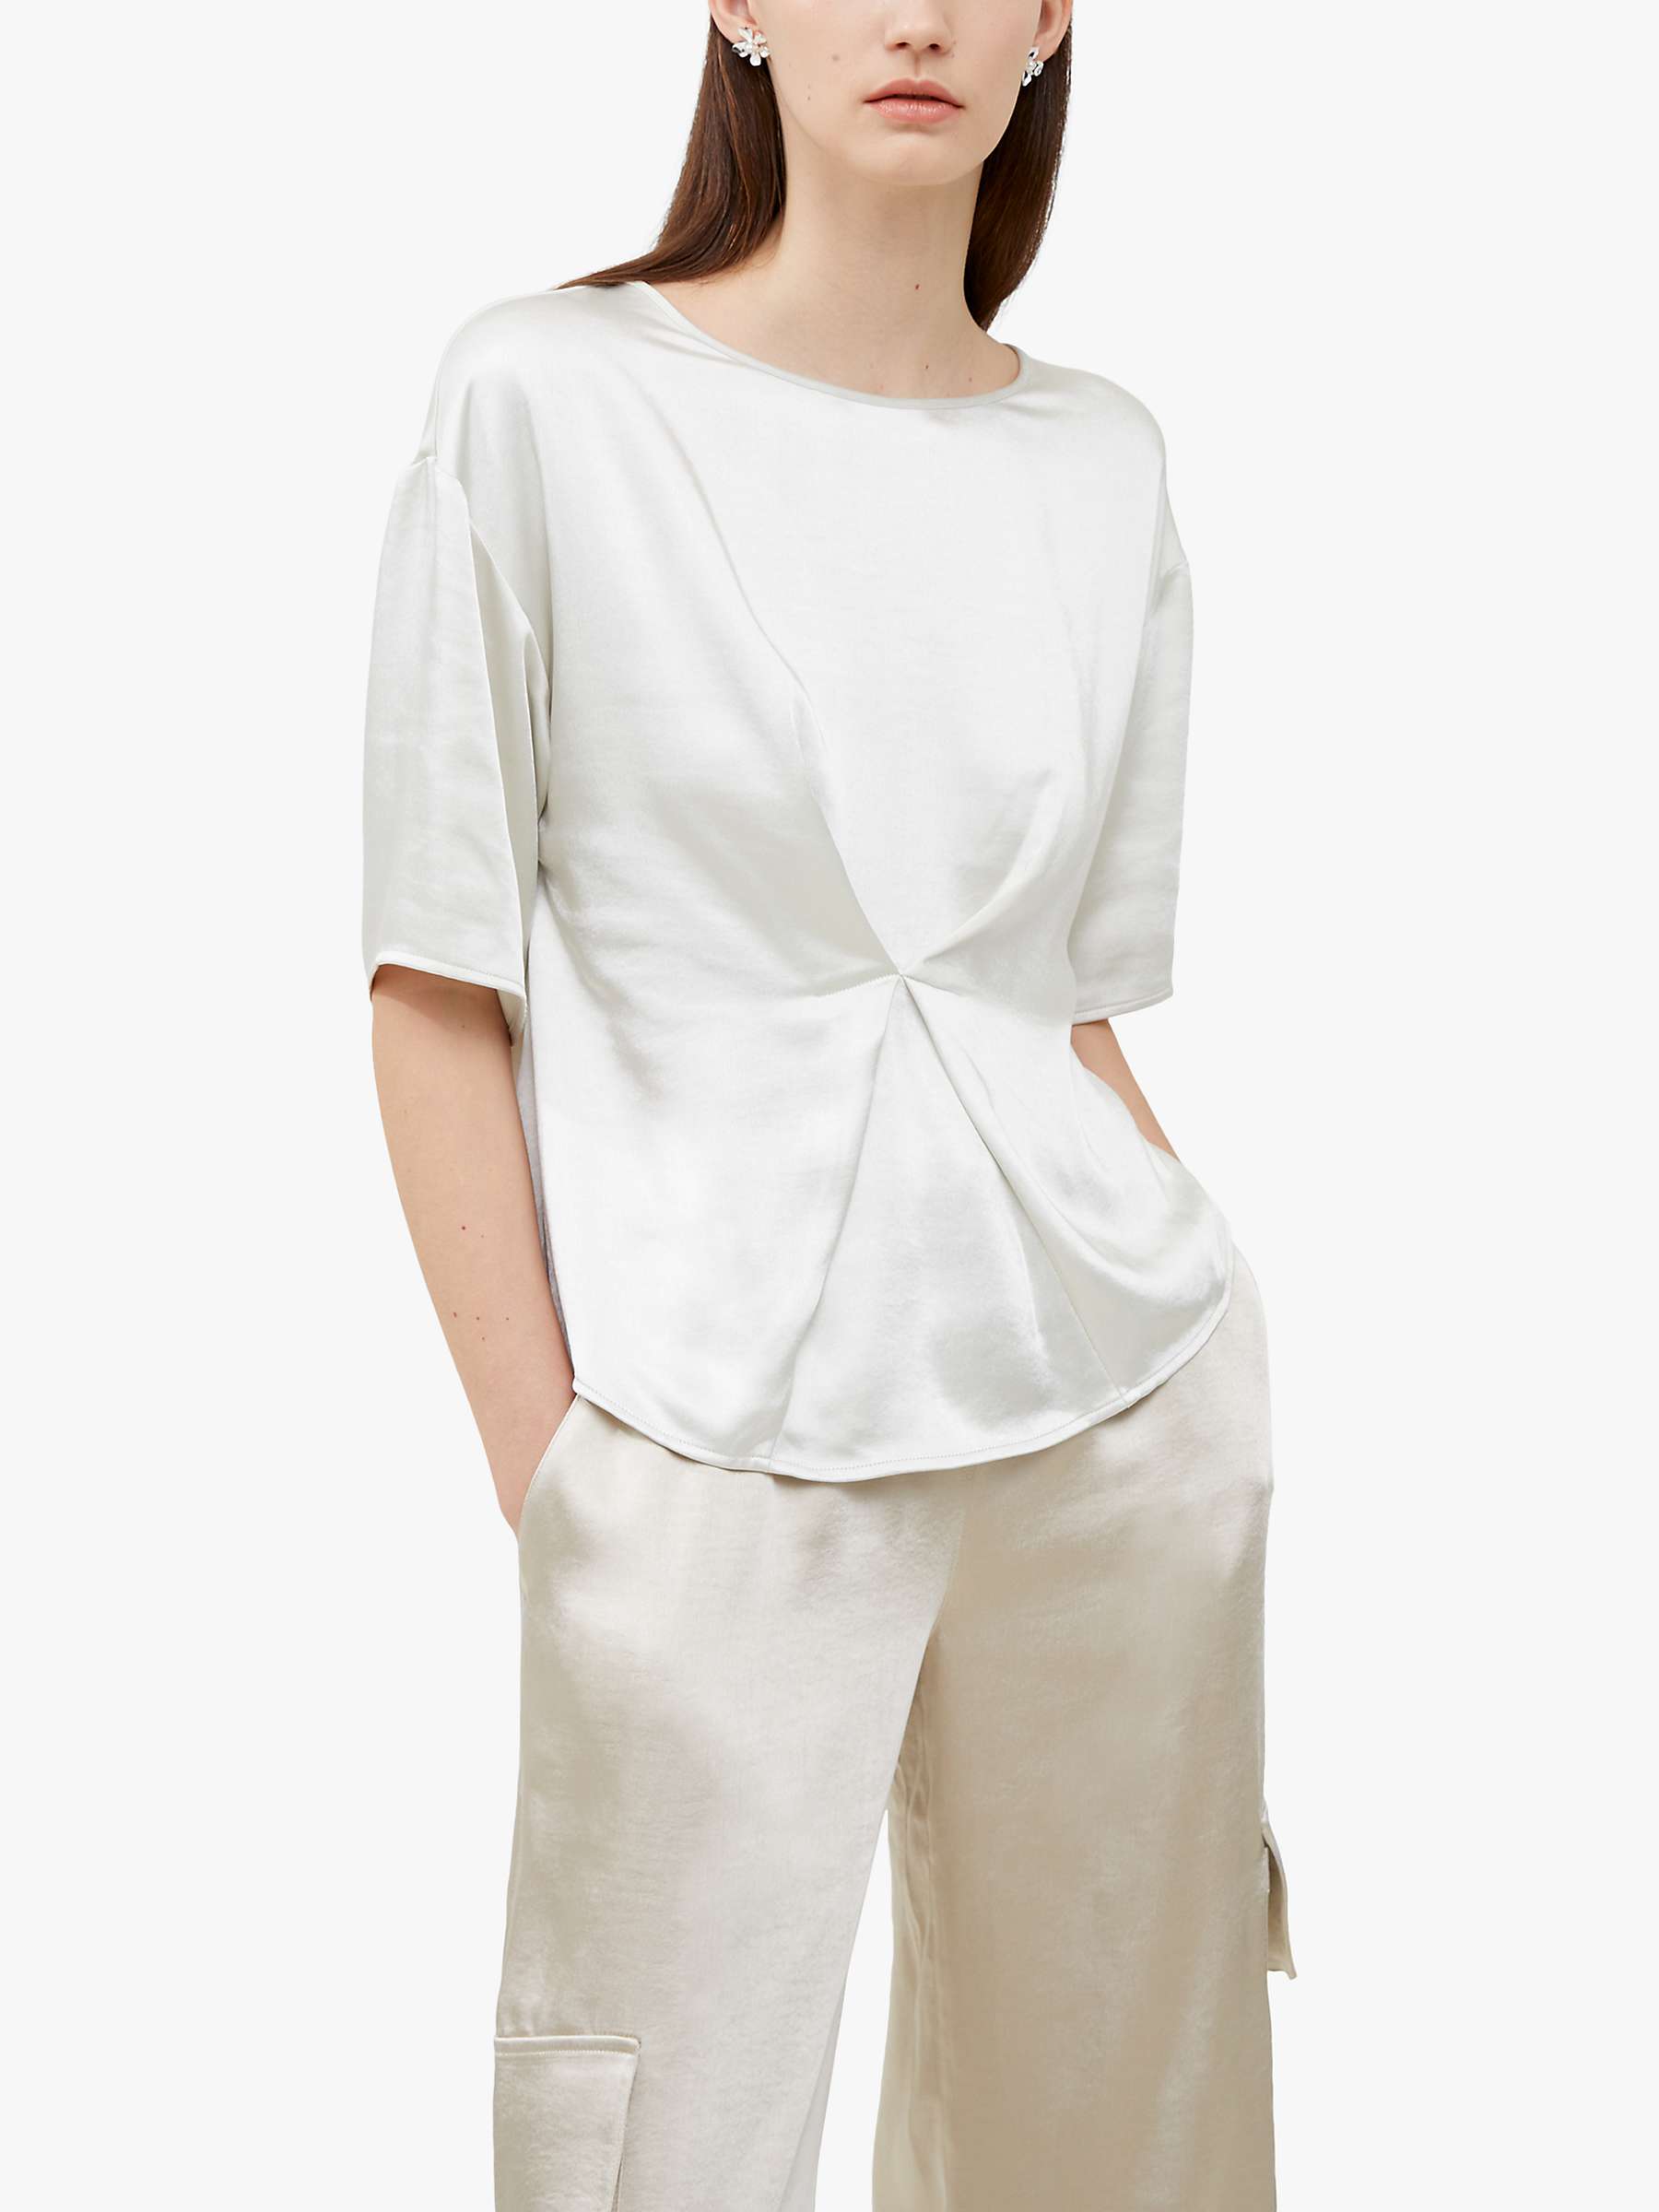 Buy French Connection Chloetta Satin Blouse, Silver Lining Online at johnlewis.com